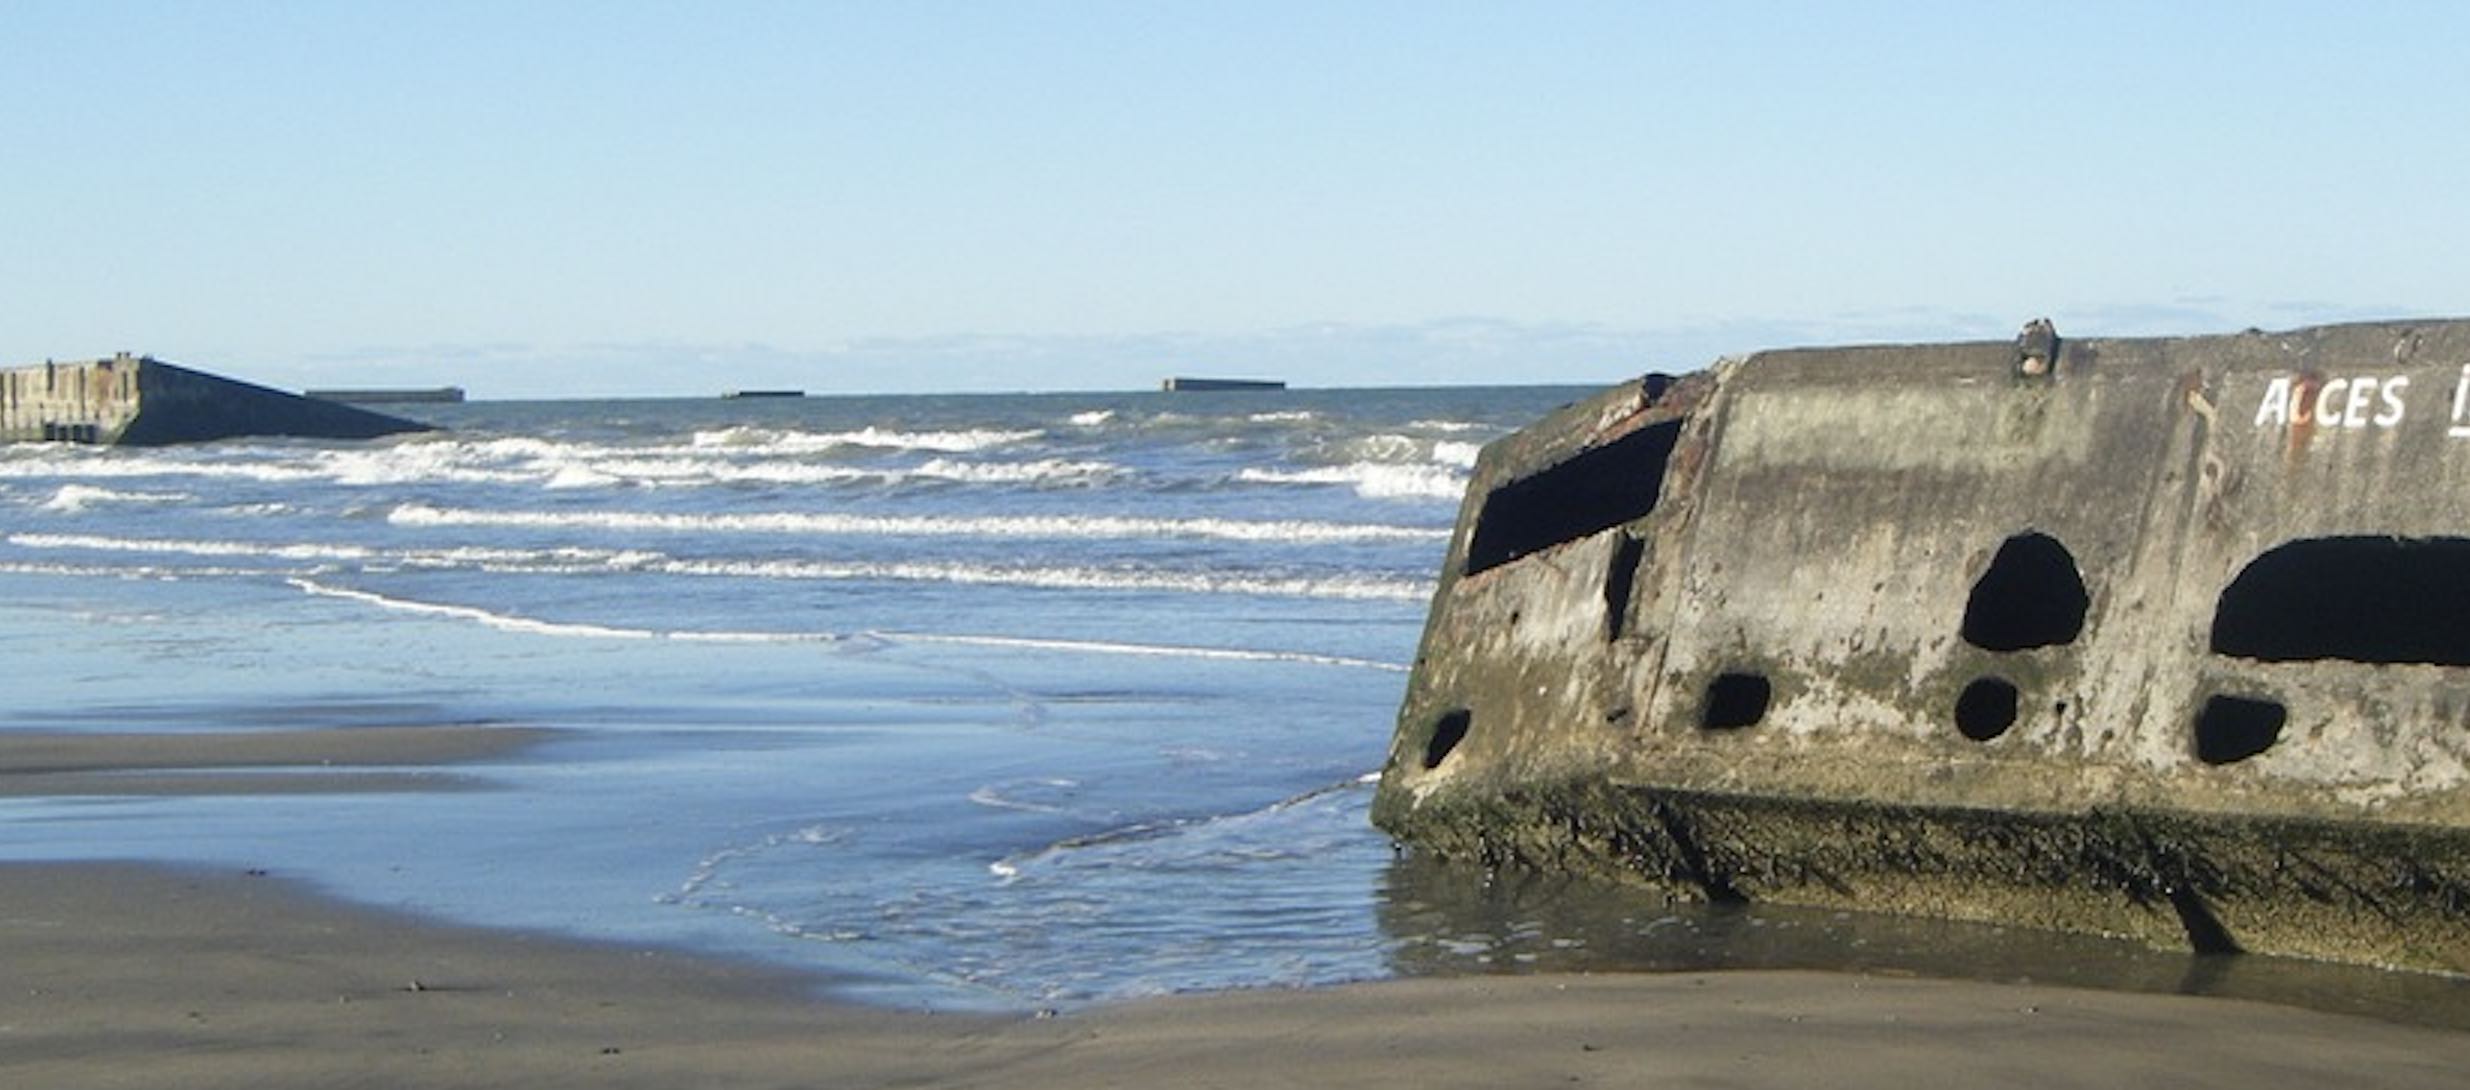 Remnants of WWII are scattered along the beaches of Normandy.